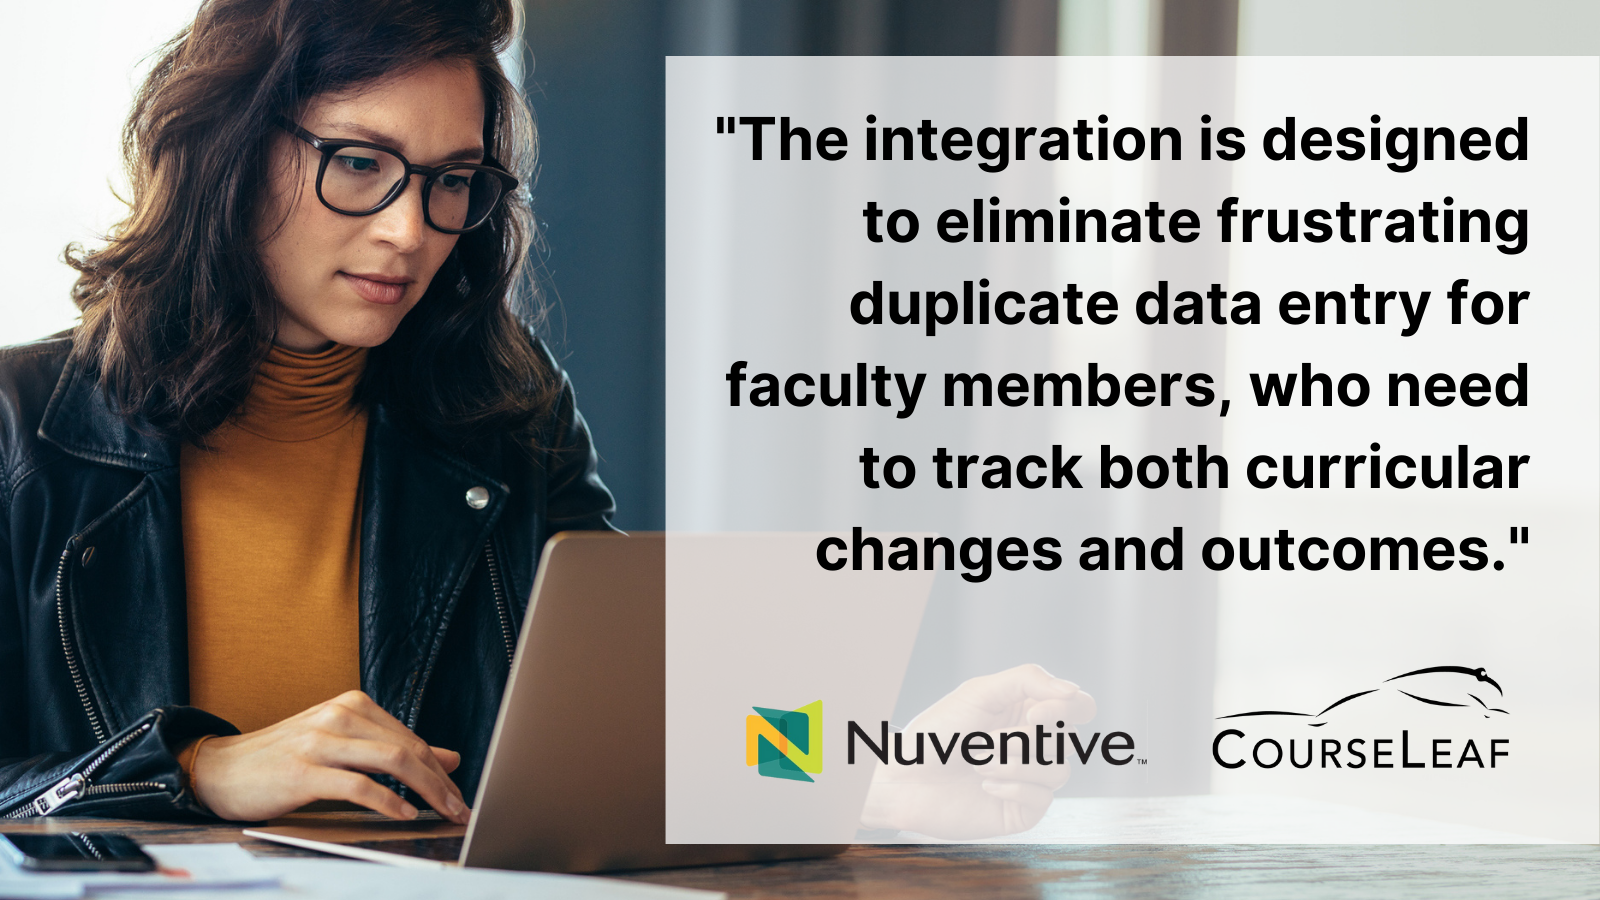 "The integration is designed to eliminate frustrating duplicate data entry for faculty members, who need to track both curricular changes and outcomes." Nuventive CourseLeaf integration